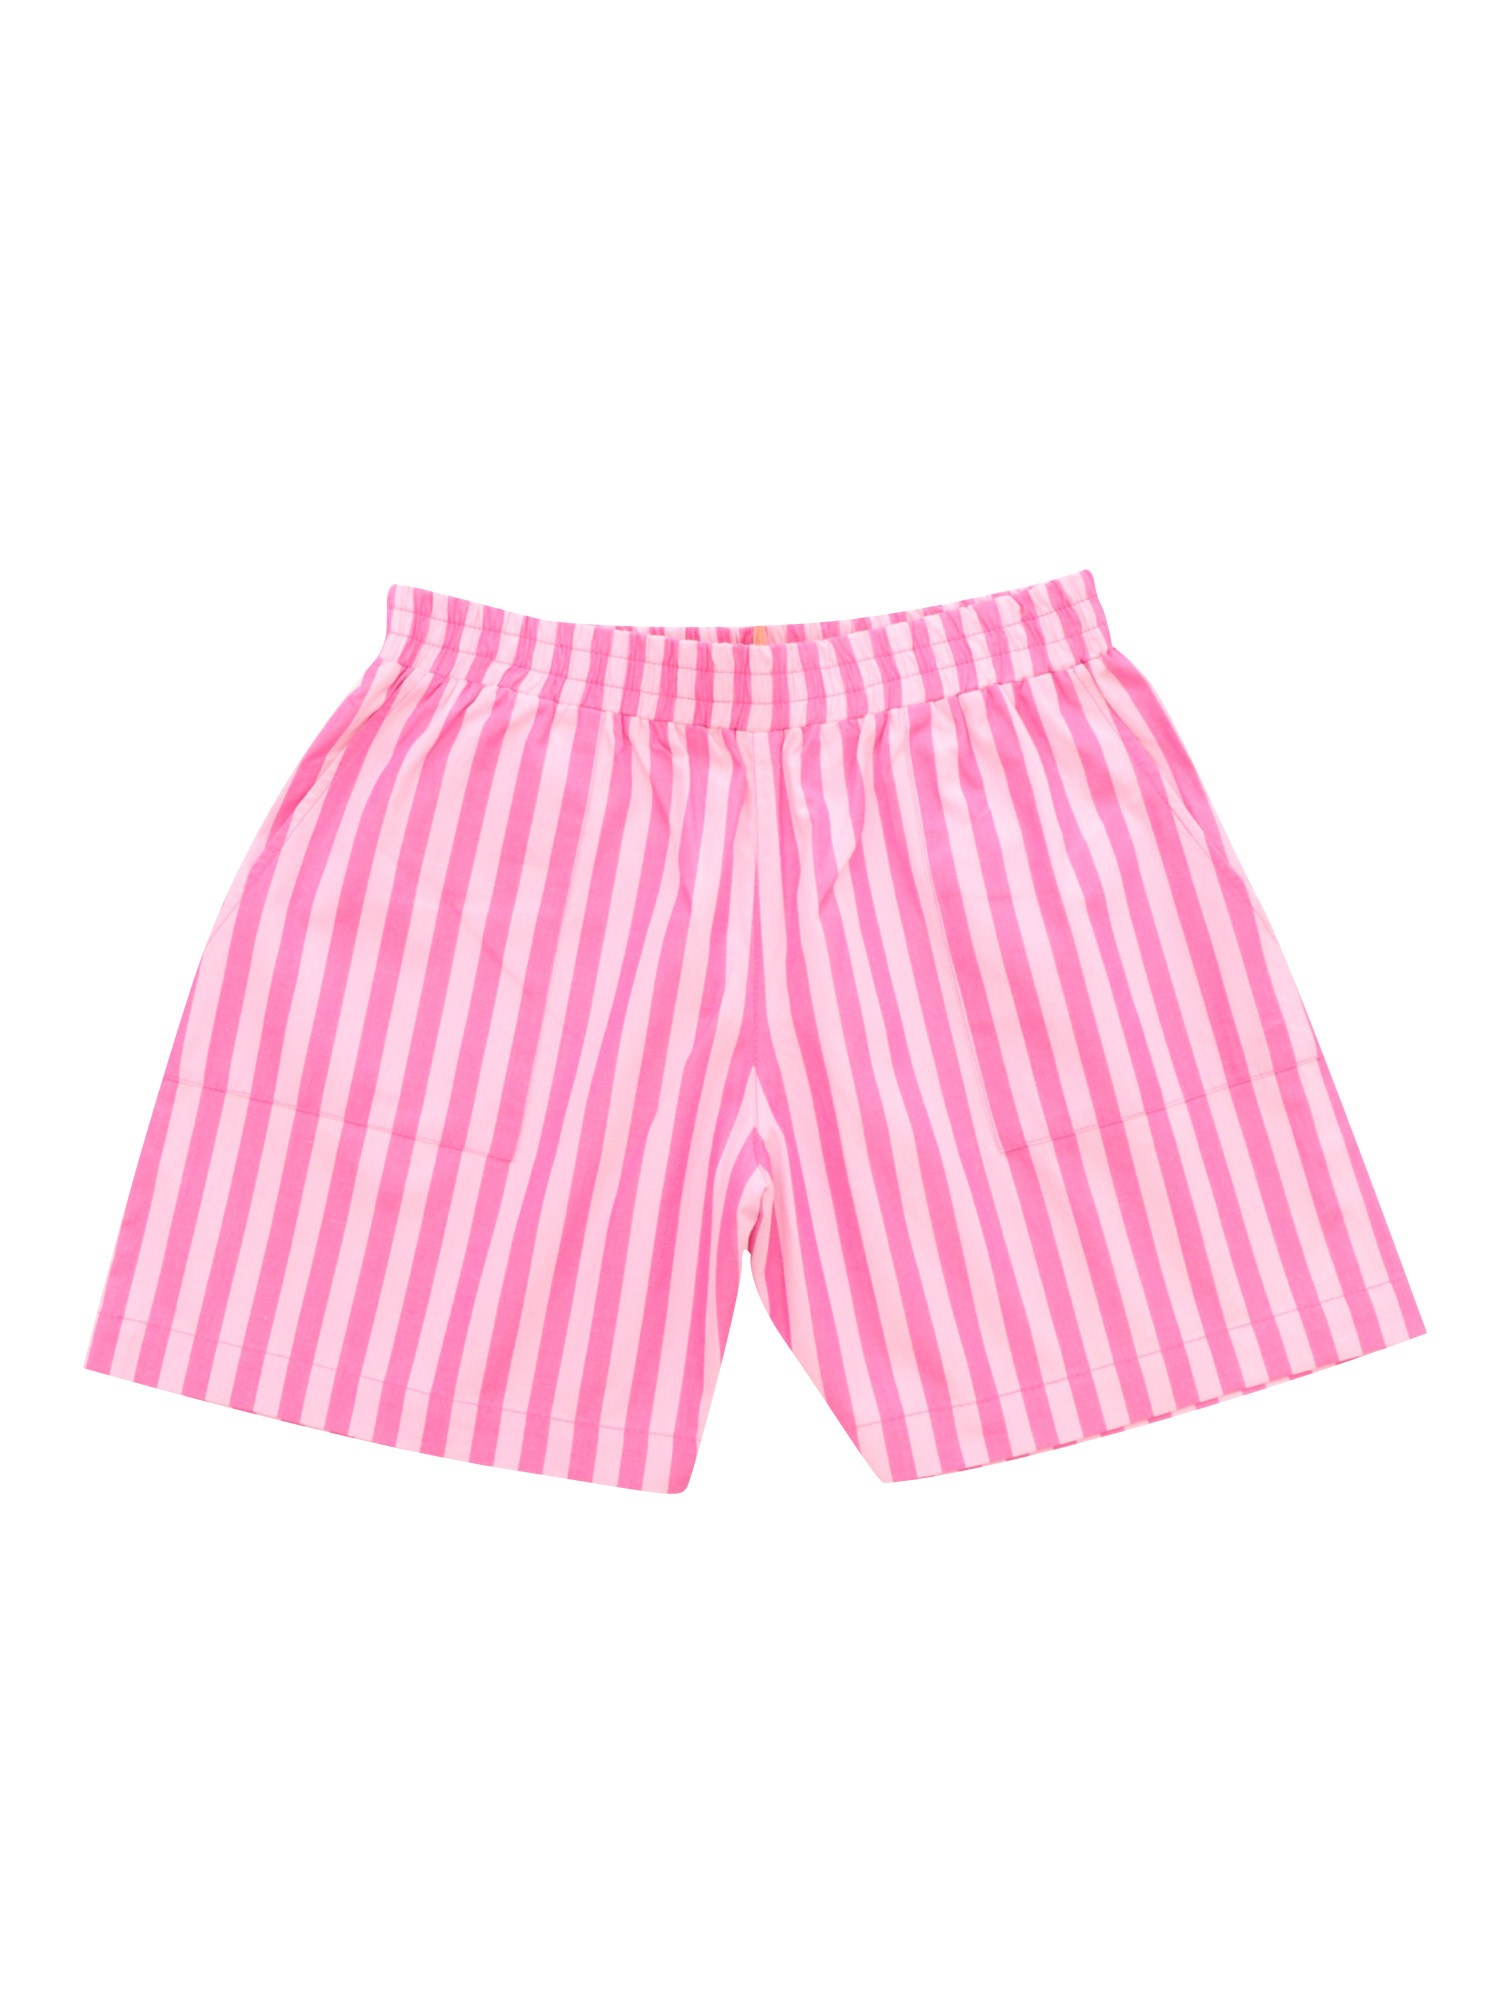 Max & Co Pink Striped Shorts